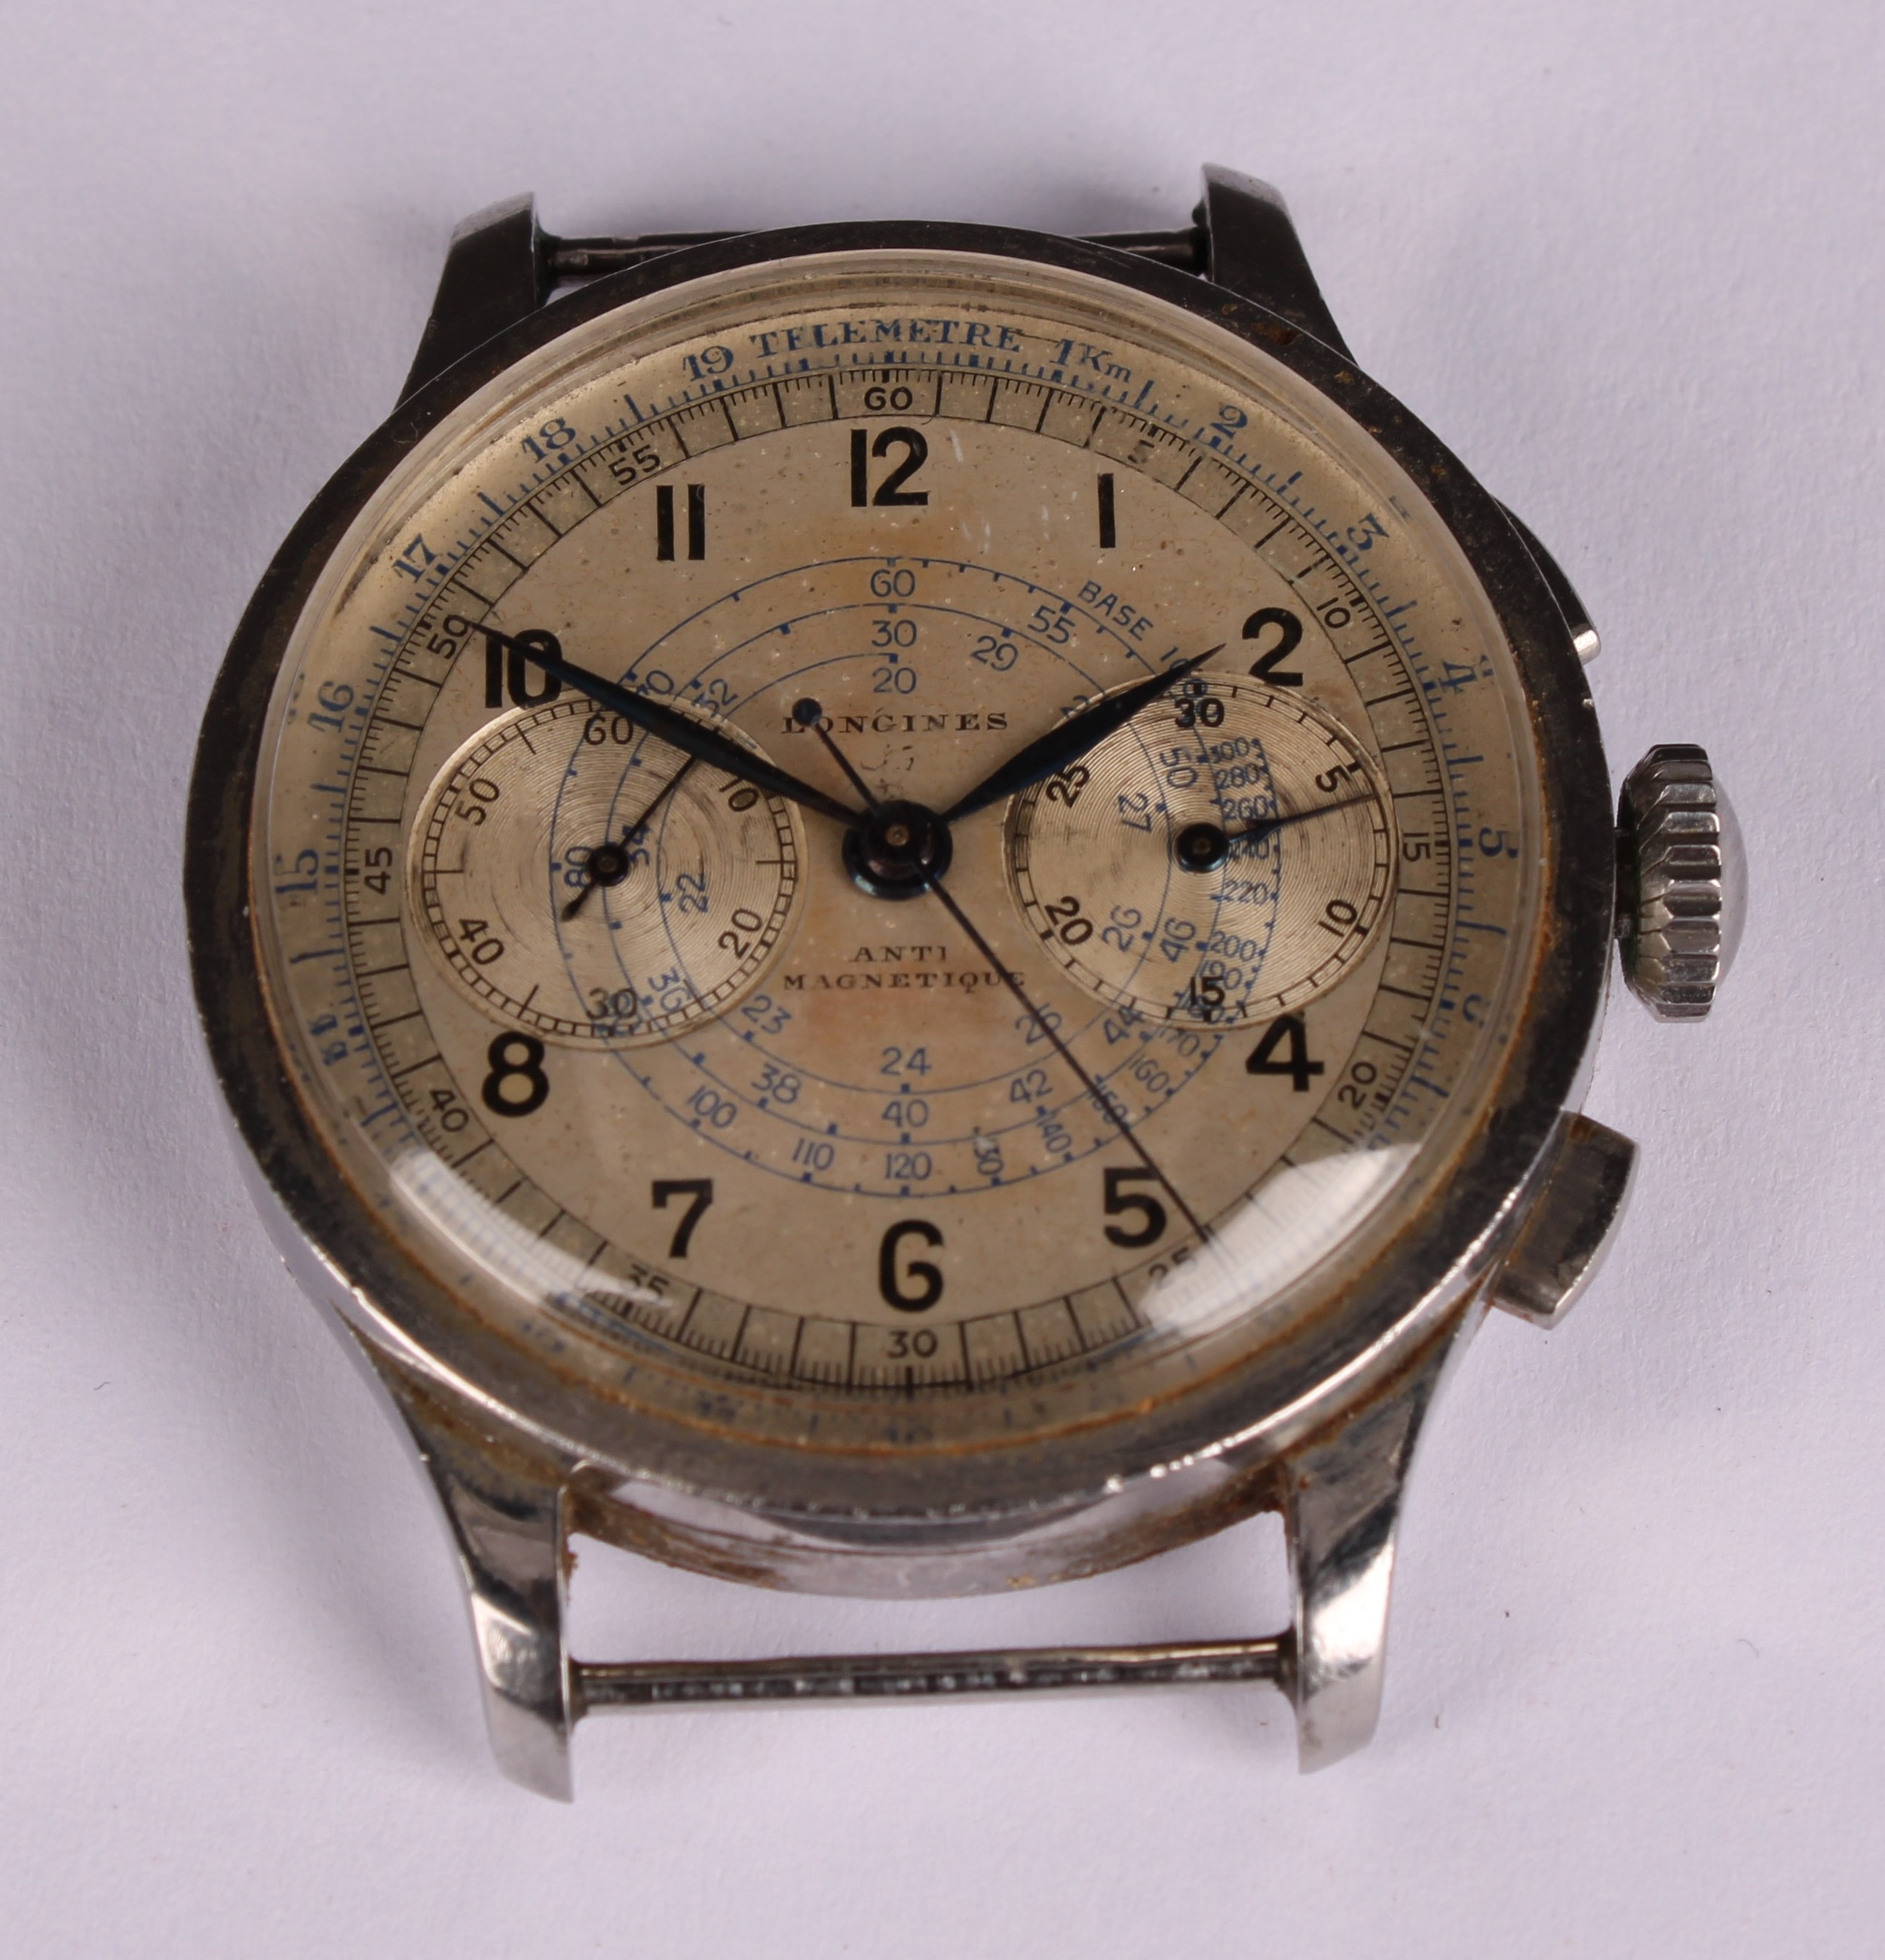 A Longines Telemetre stainless steel chronograph watch, silvered dial with Arabic numerals, pair - Image 2 of 5